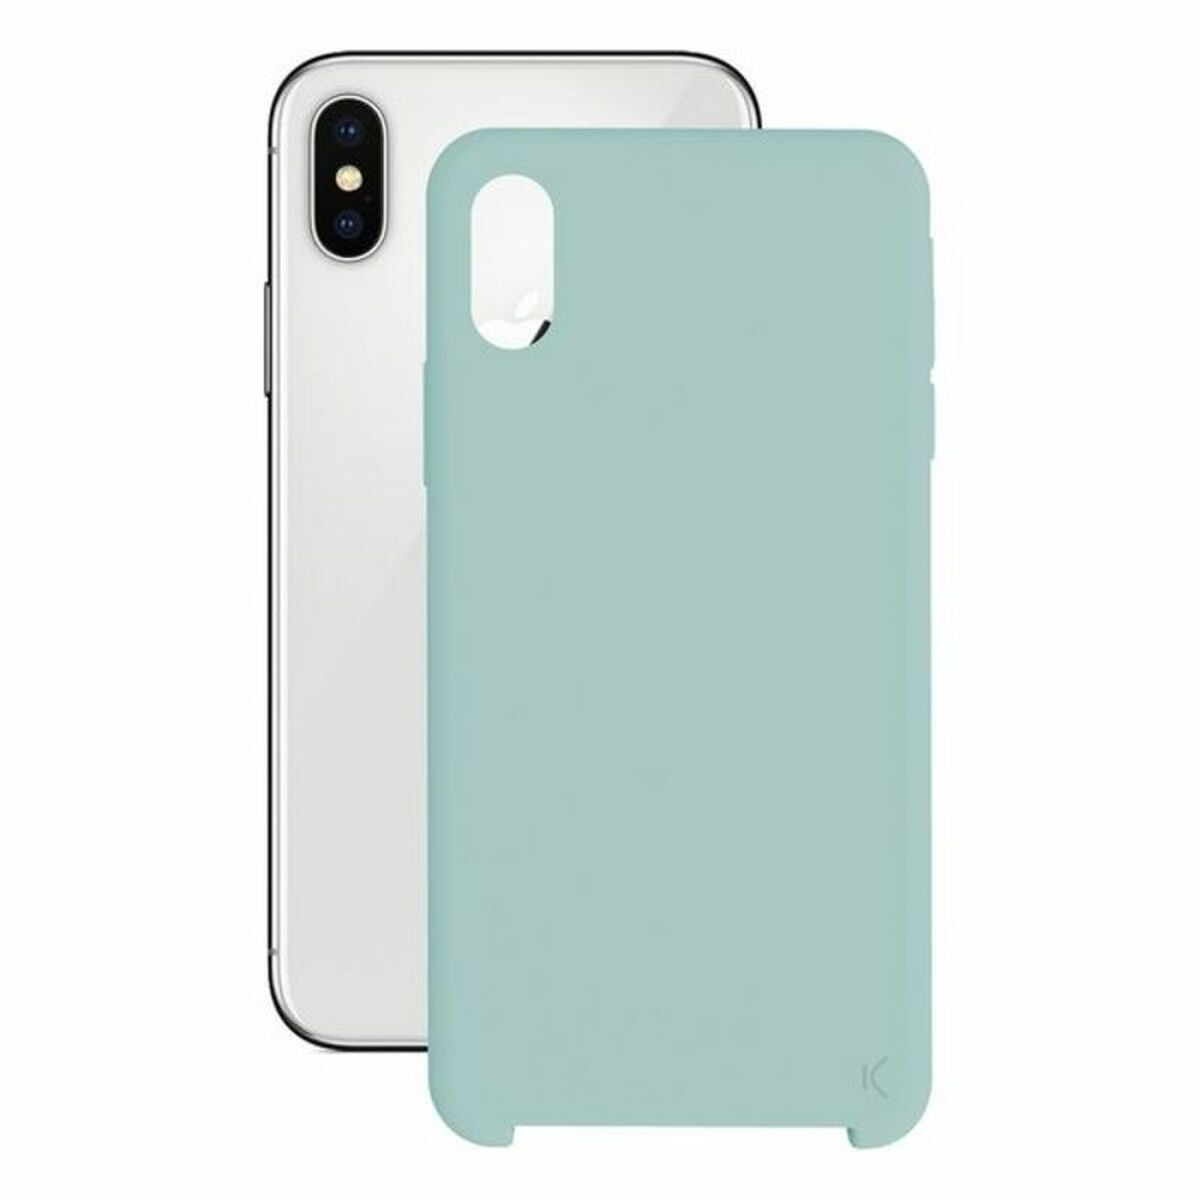 Mobile cover iPhone X/XS KSIX Soft Iphone X, XS